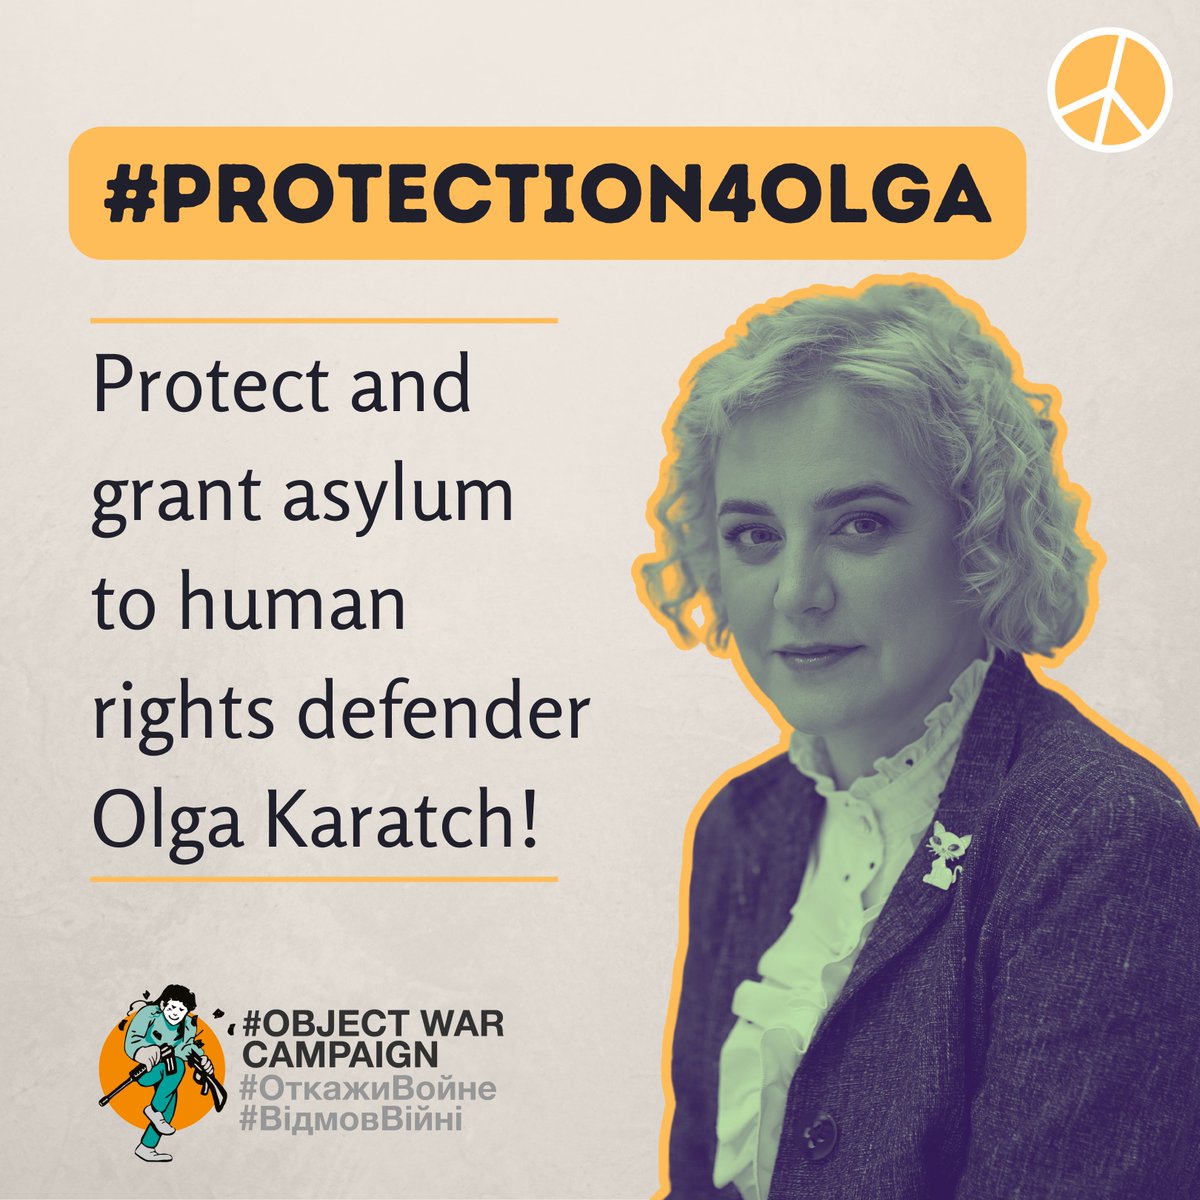 Join us in supporting Olga Karatch, a brave human rights defender seeking asylum in Lithuania!

Help by sharing #protection4olga and #ObjectWarCampaign!

More ways to help on ipb.org.

💪🌍 Together, we can stand up for justice and human rights. Please share!